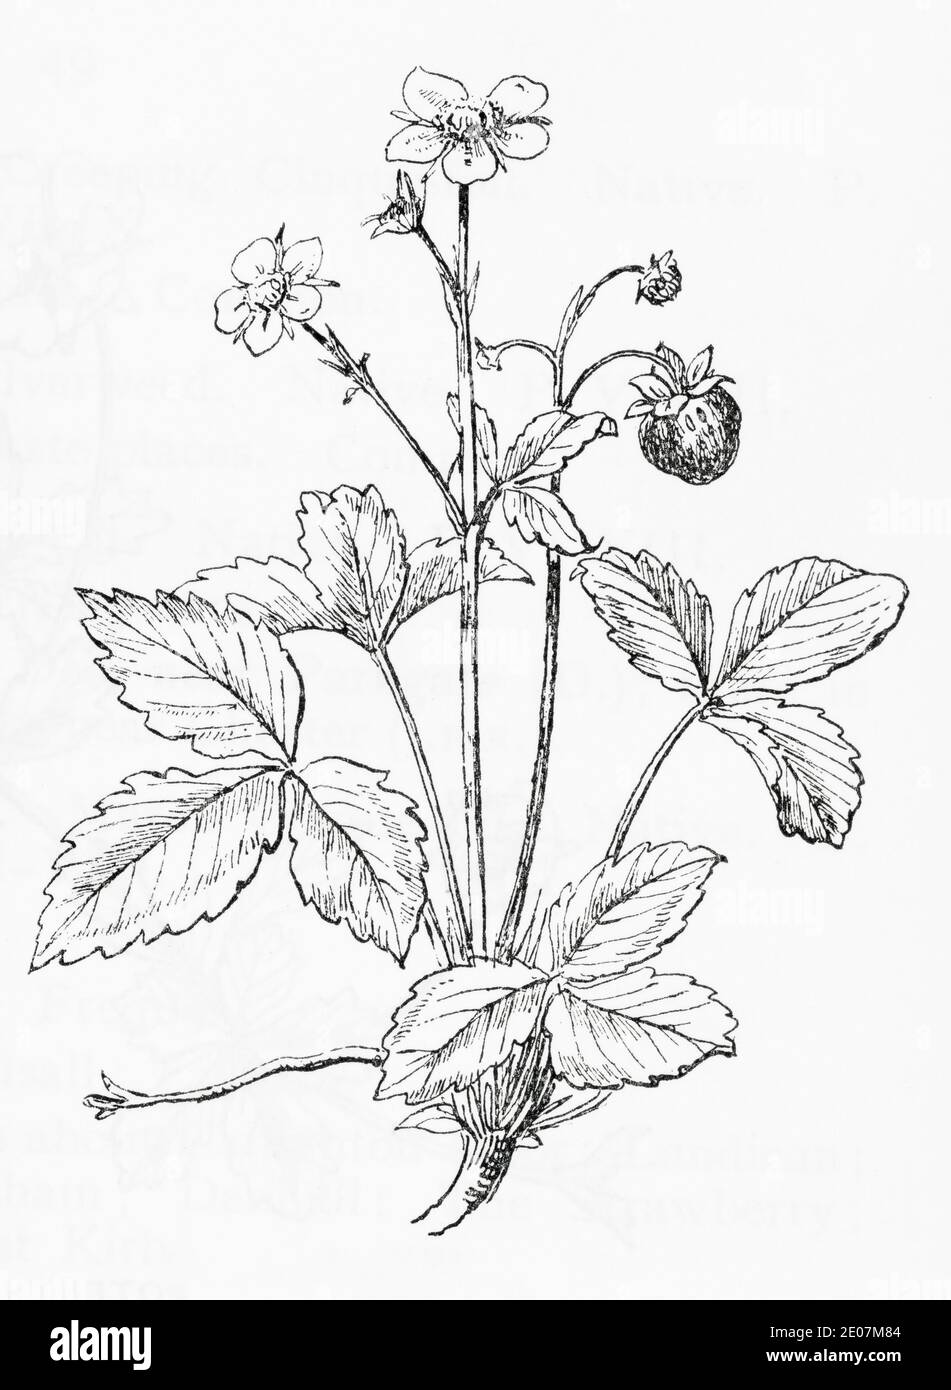 Old botanical illustration engraving of Wild Strawberry / Fragaria vesca. Traditional medicinal herbal plant. See Notes Stock Photo